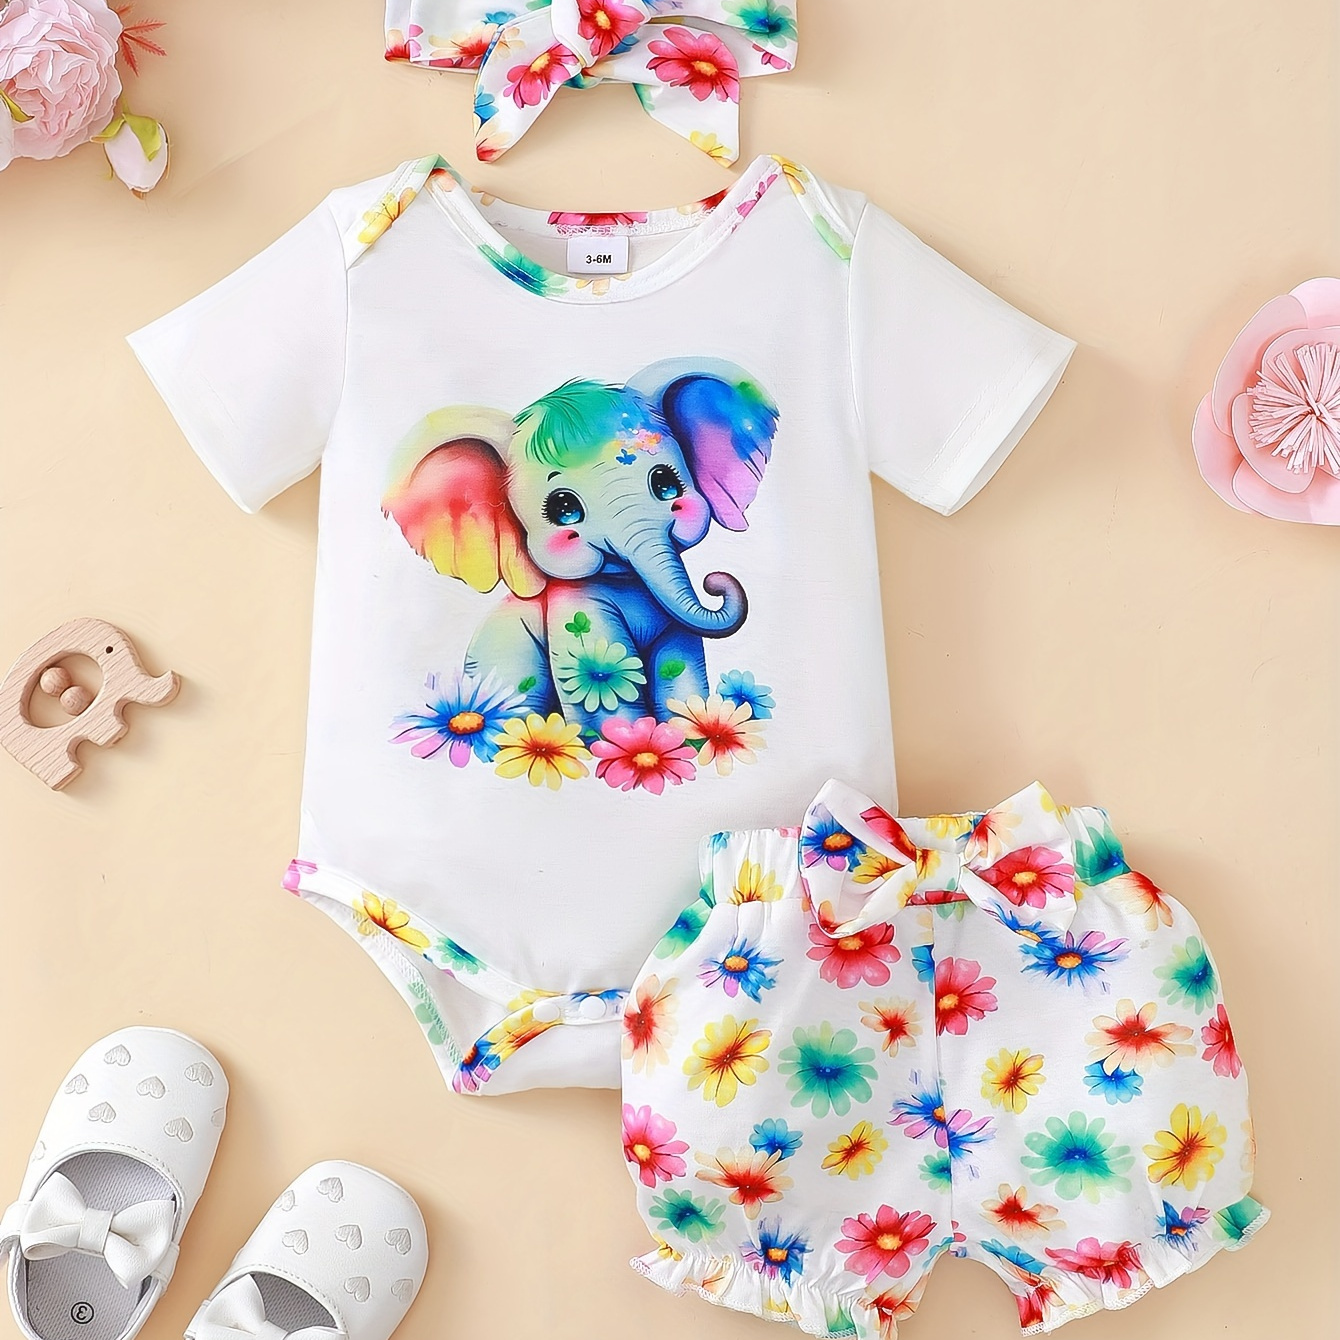 

Baby's Colorful Elephant Print 2pcs Casual Summer Outfit, Triangle Bodysuit & Flower Pattern Shorts Set, Toddler & Infant Girl's Clothes For Daily/holiday/party